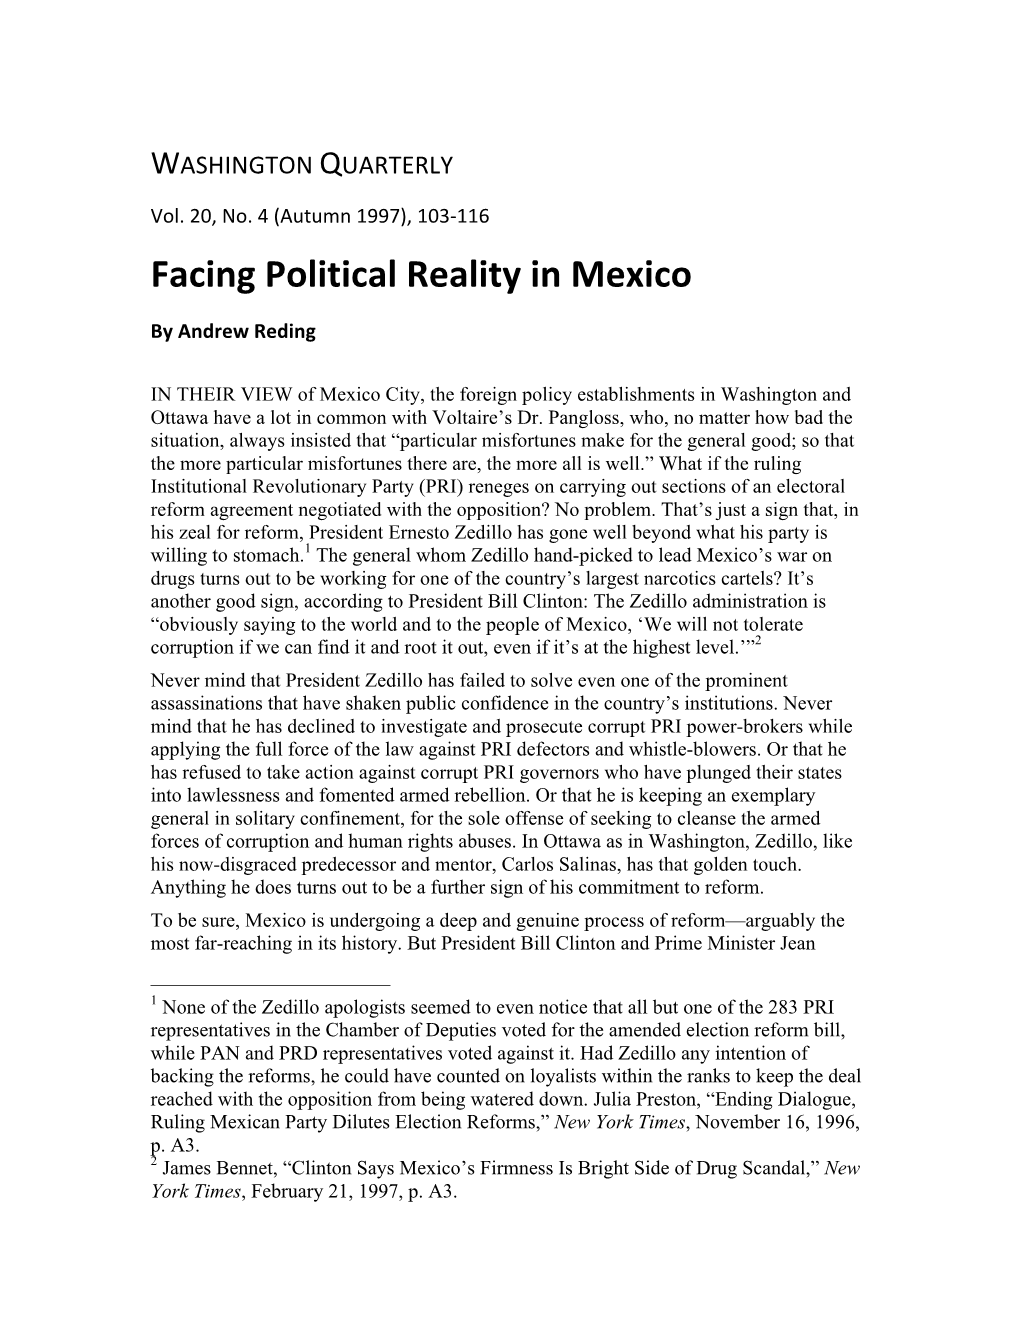 Facing Political Reality in Mexico